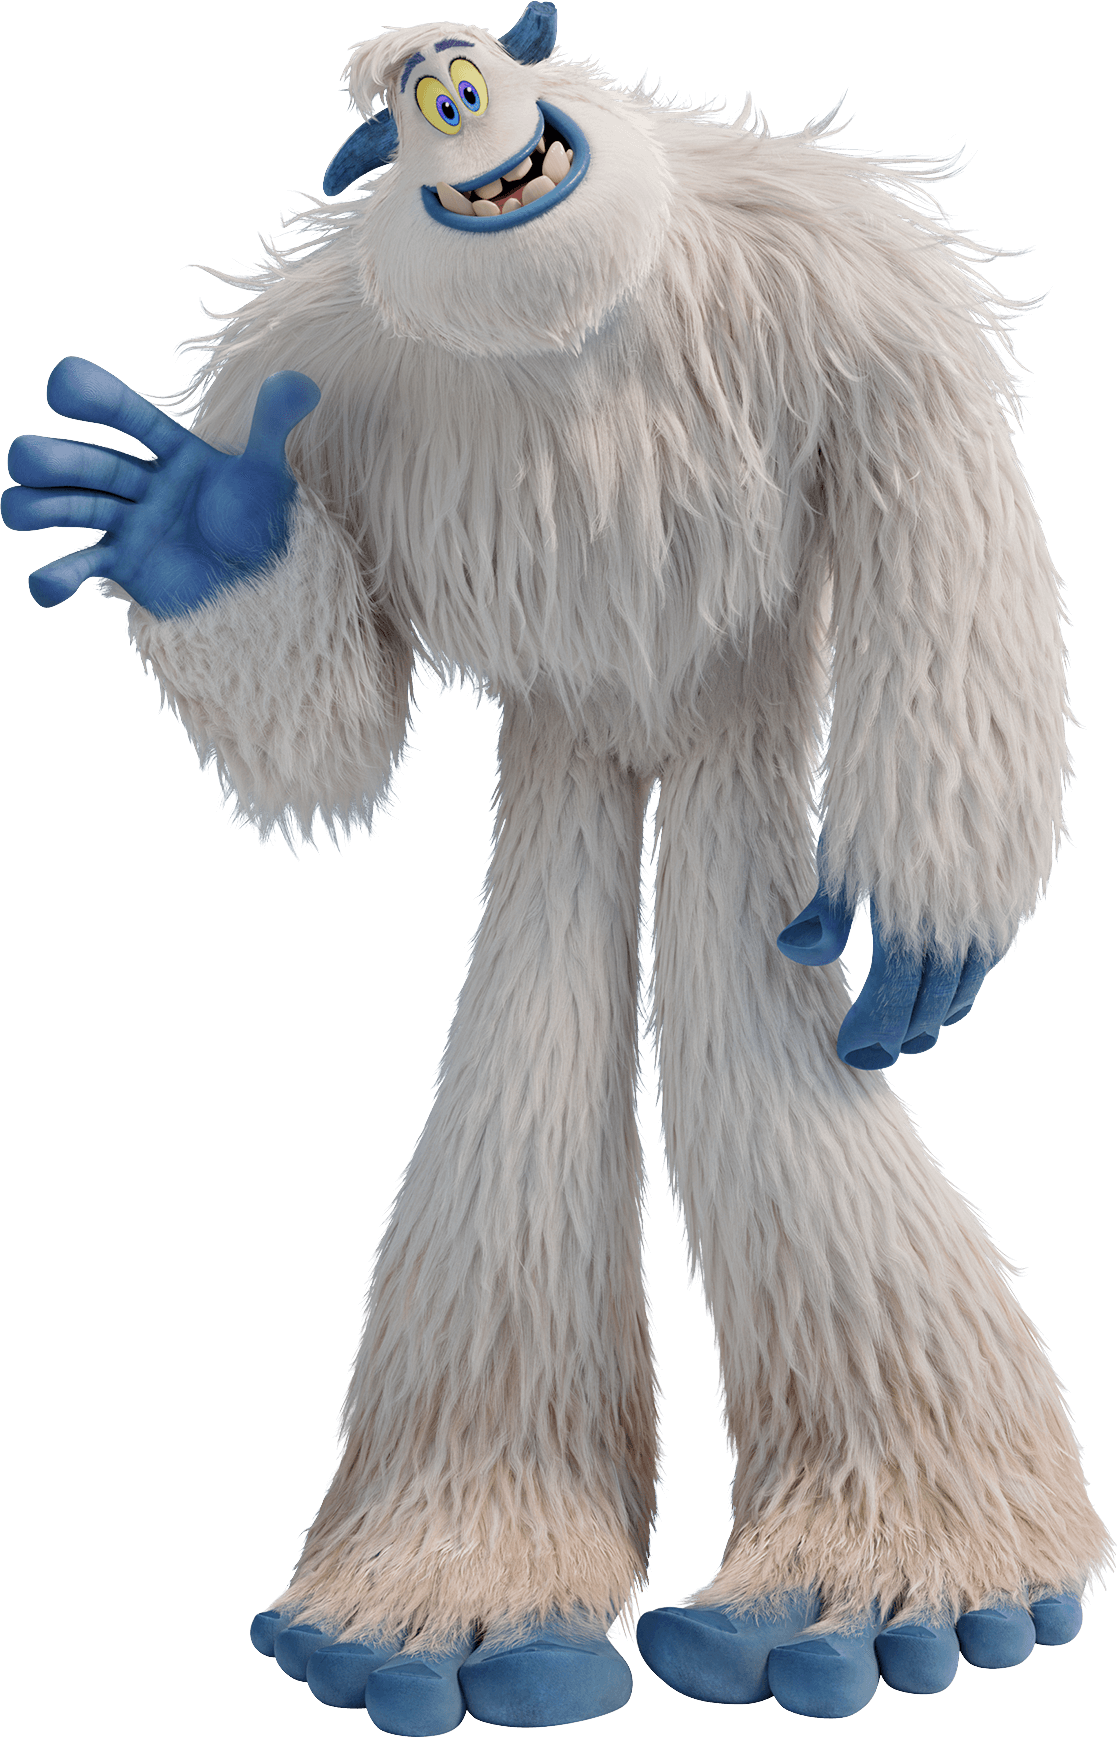 Category:Smallfoot characters | Warner Bros. Entertainment Wiki